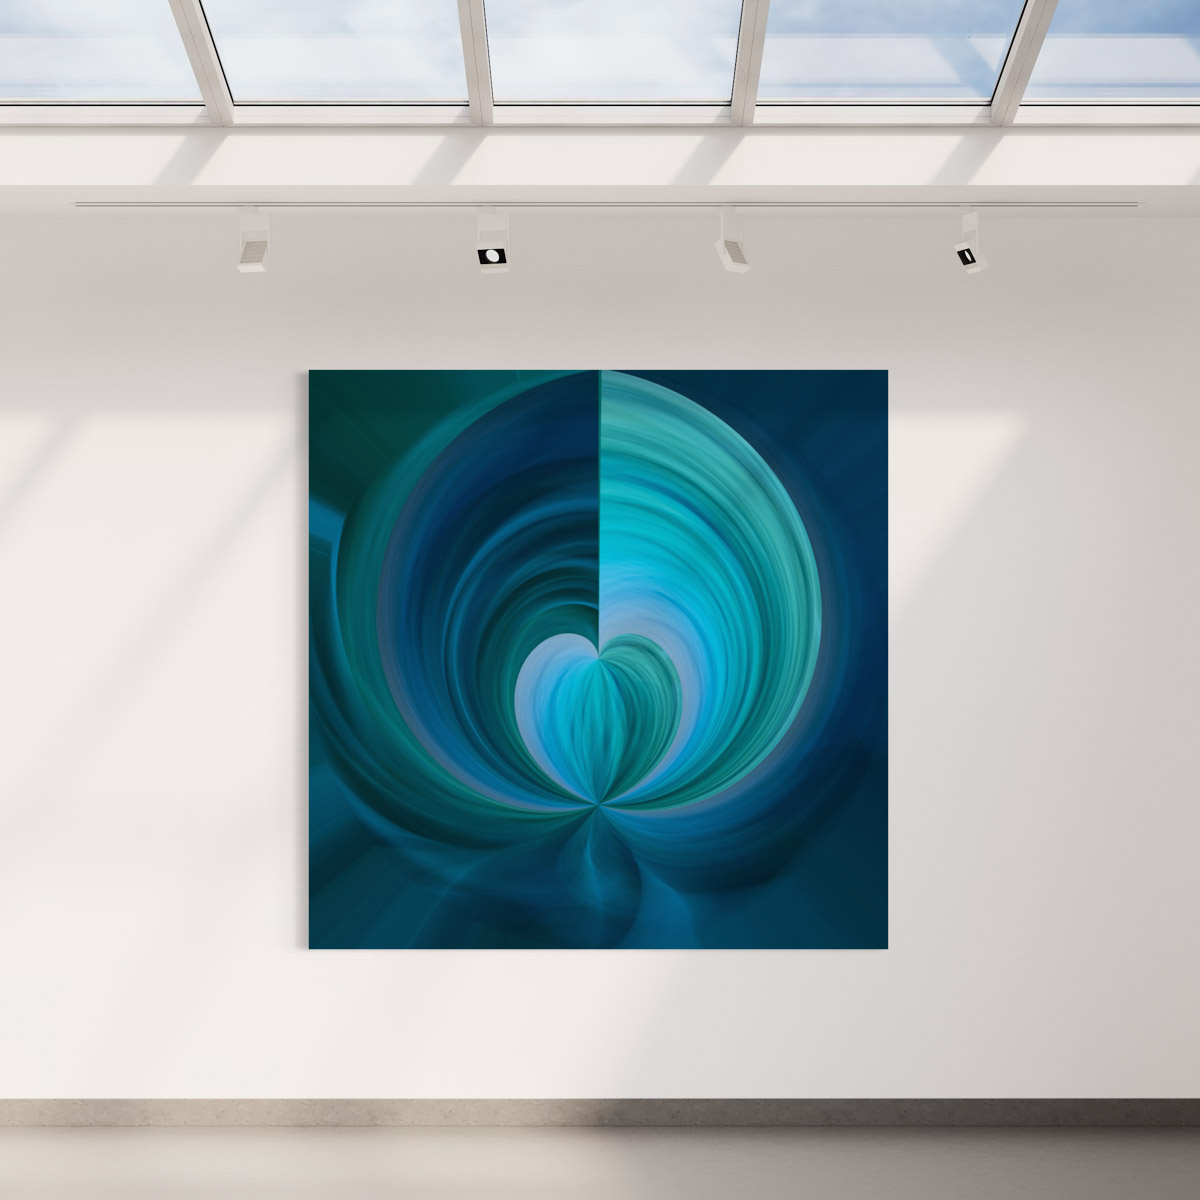 A large painting of a blue heart on the wall